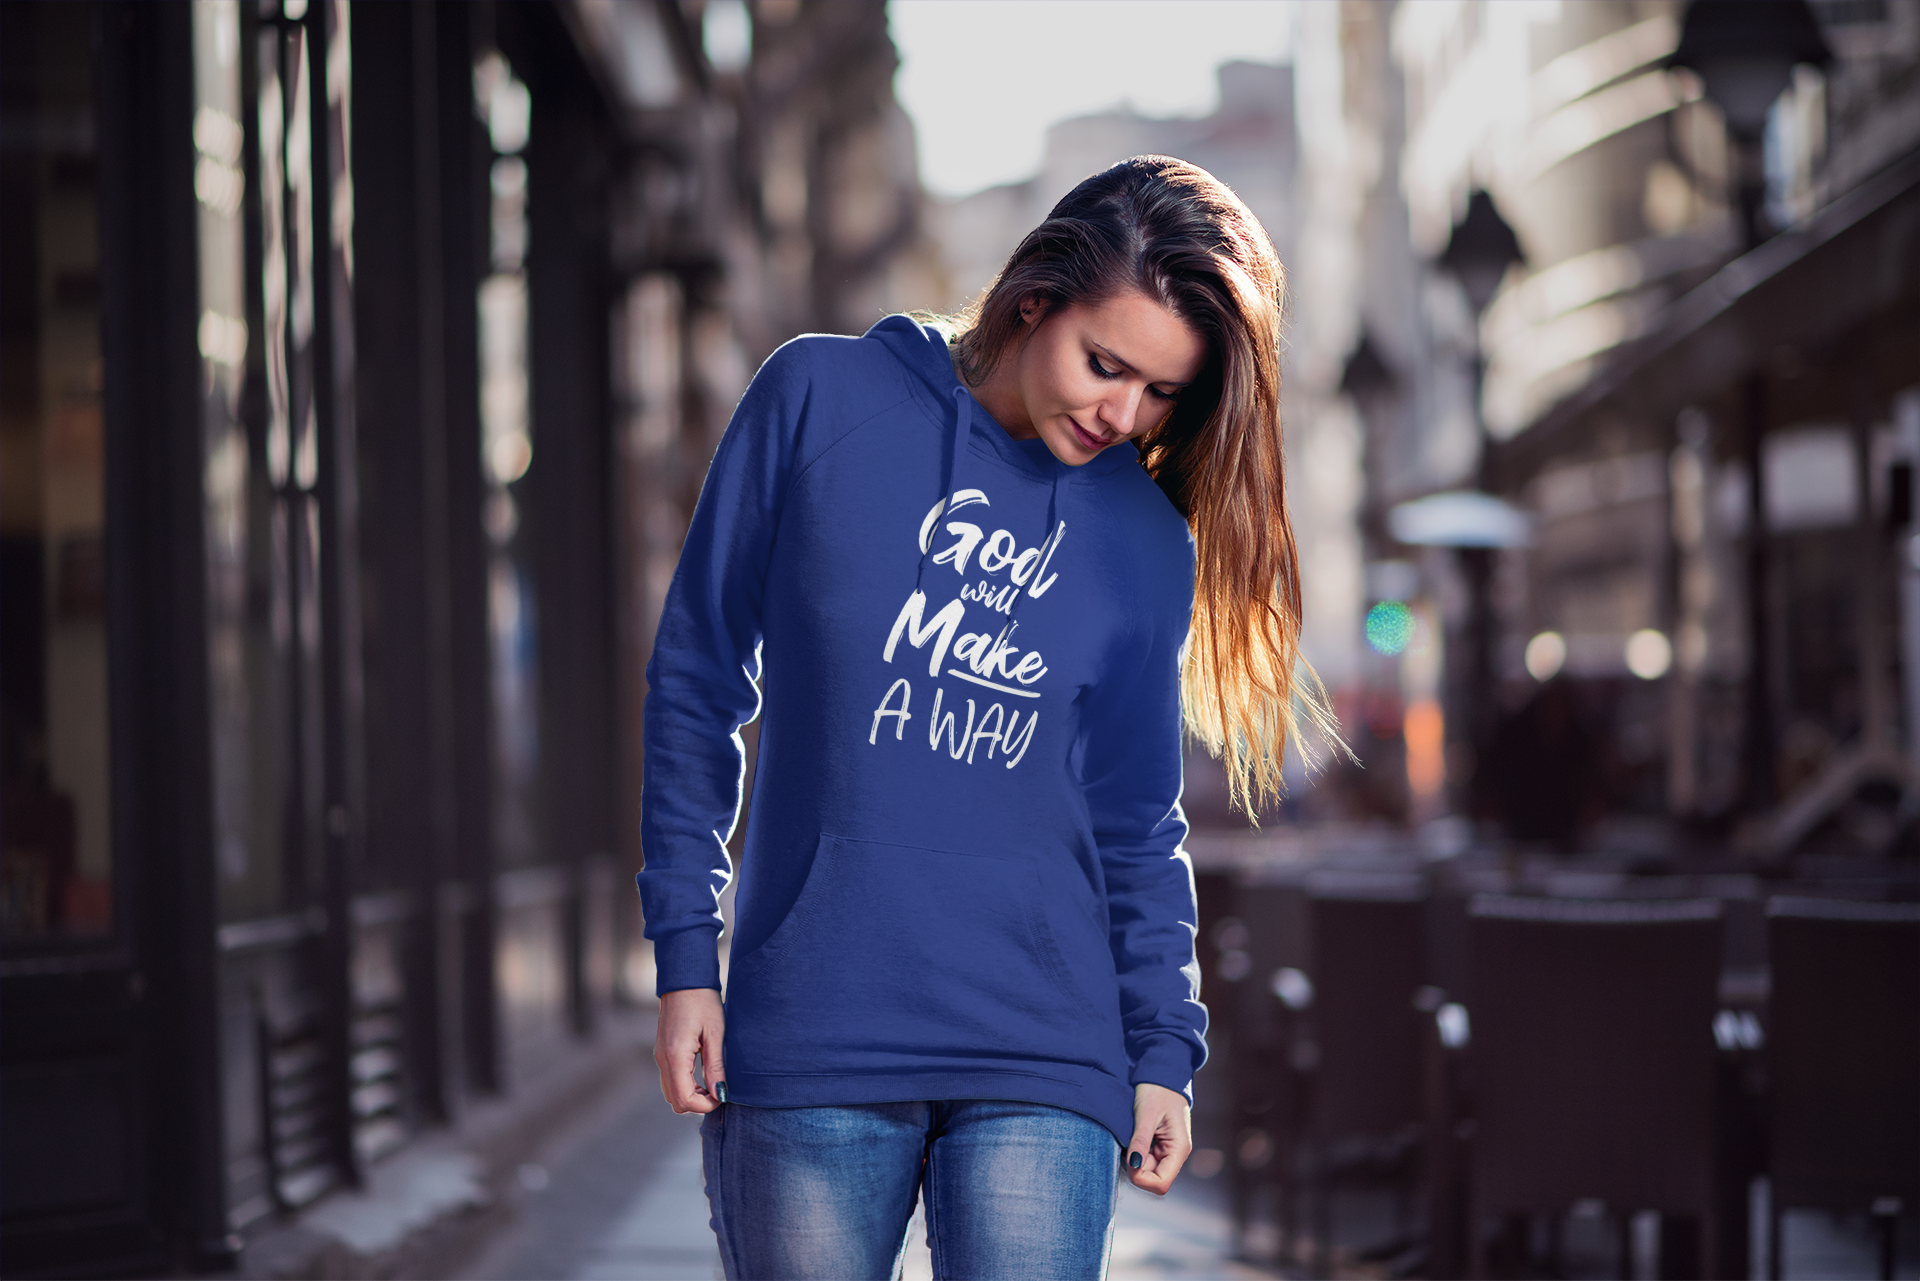 Christian apparel, Christianity clothing, Christian clothing, Christian clothing brand, Christian clothes, Christian clothing store, Christian t shirts, Christian t shirts for men, women Christian t shirts, Christian shirts